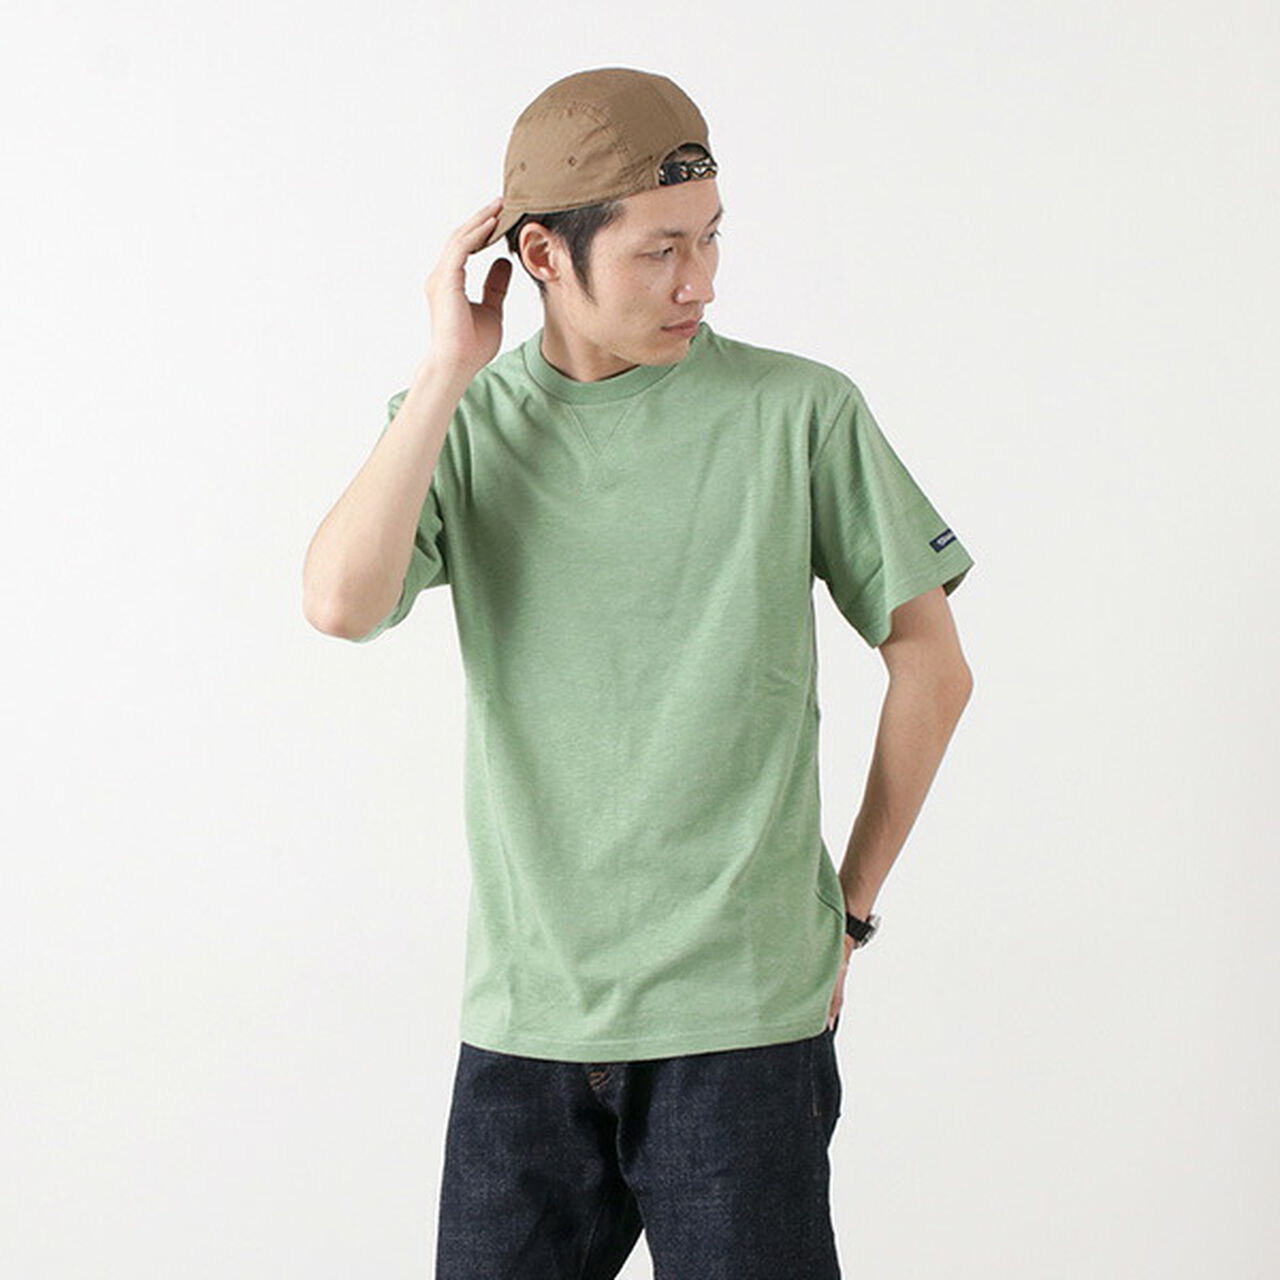 TE001SS HDCS Light Gusseted Crew T-Shirt,PearlGreen, large image number 0